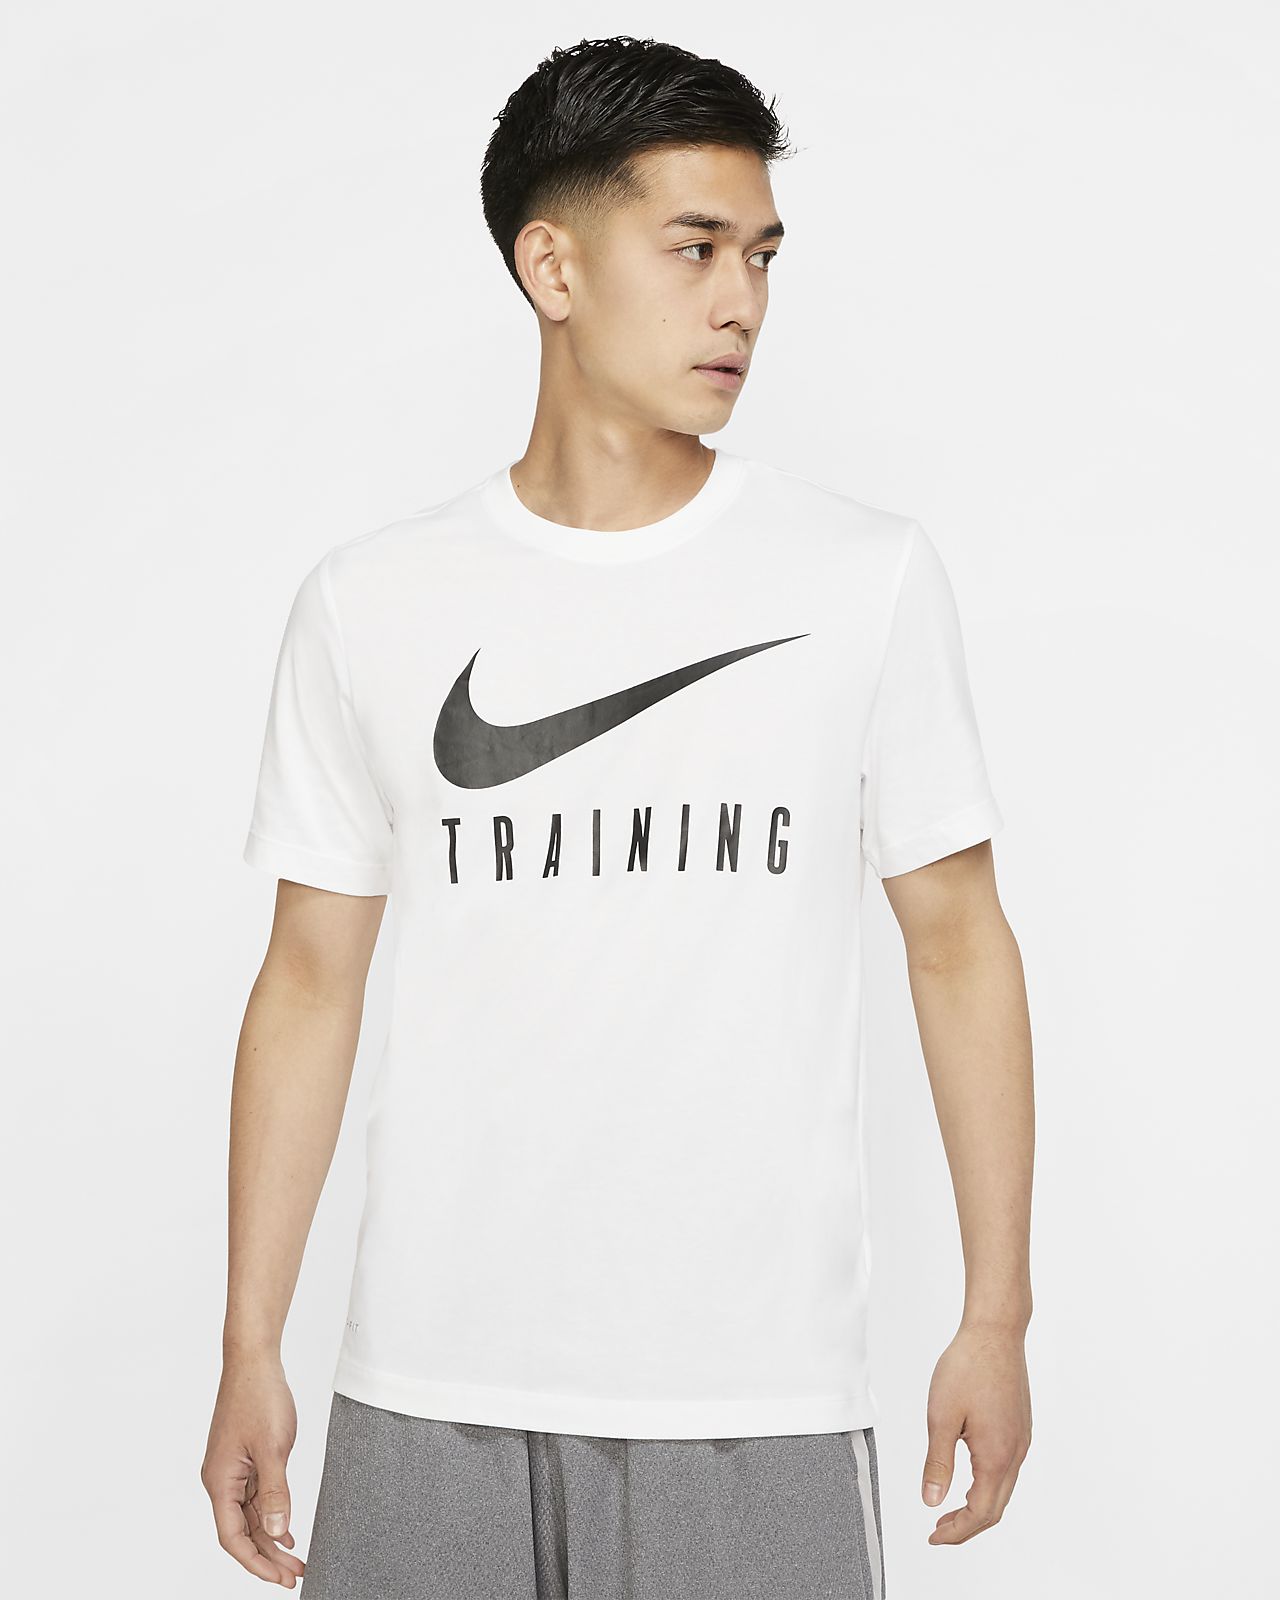 nike workout shirts mens Sale,up to 30 